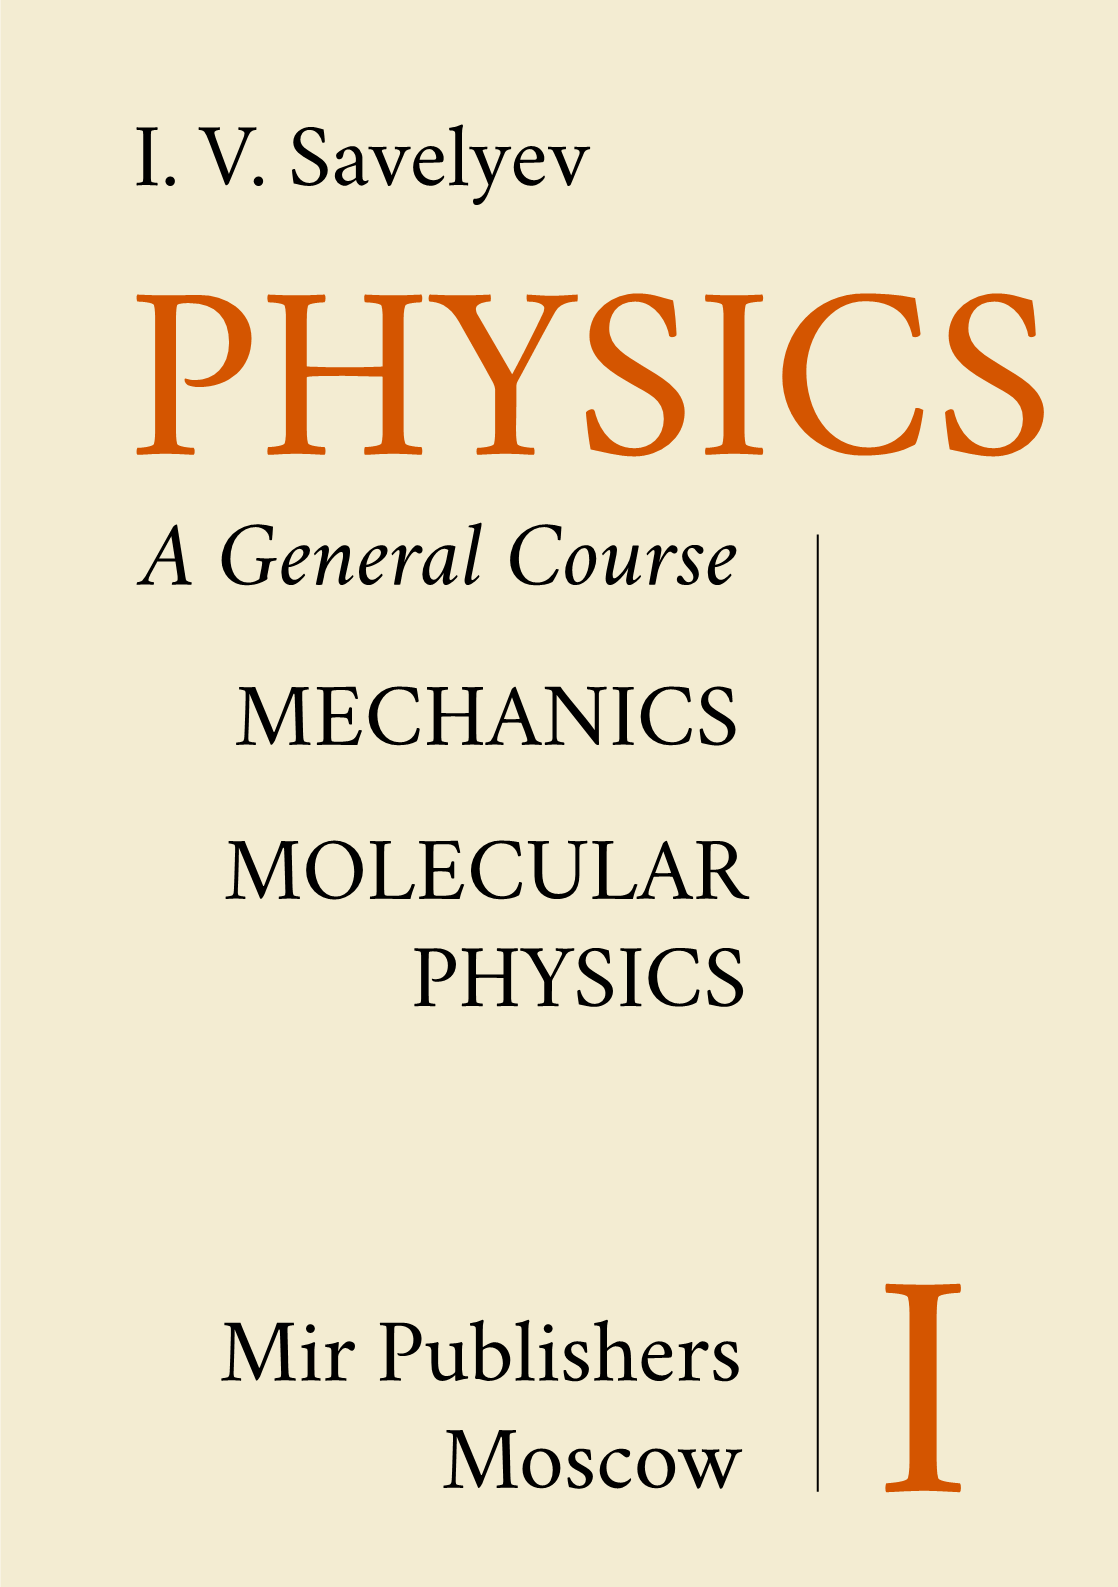 saveliev_physics_general_course_1_1.png